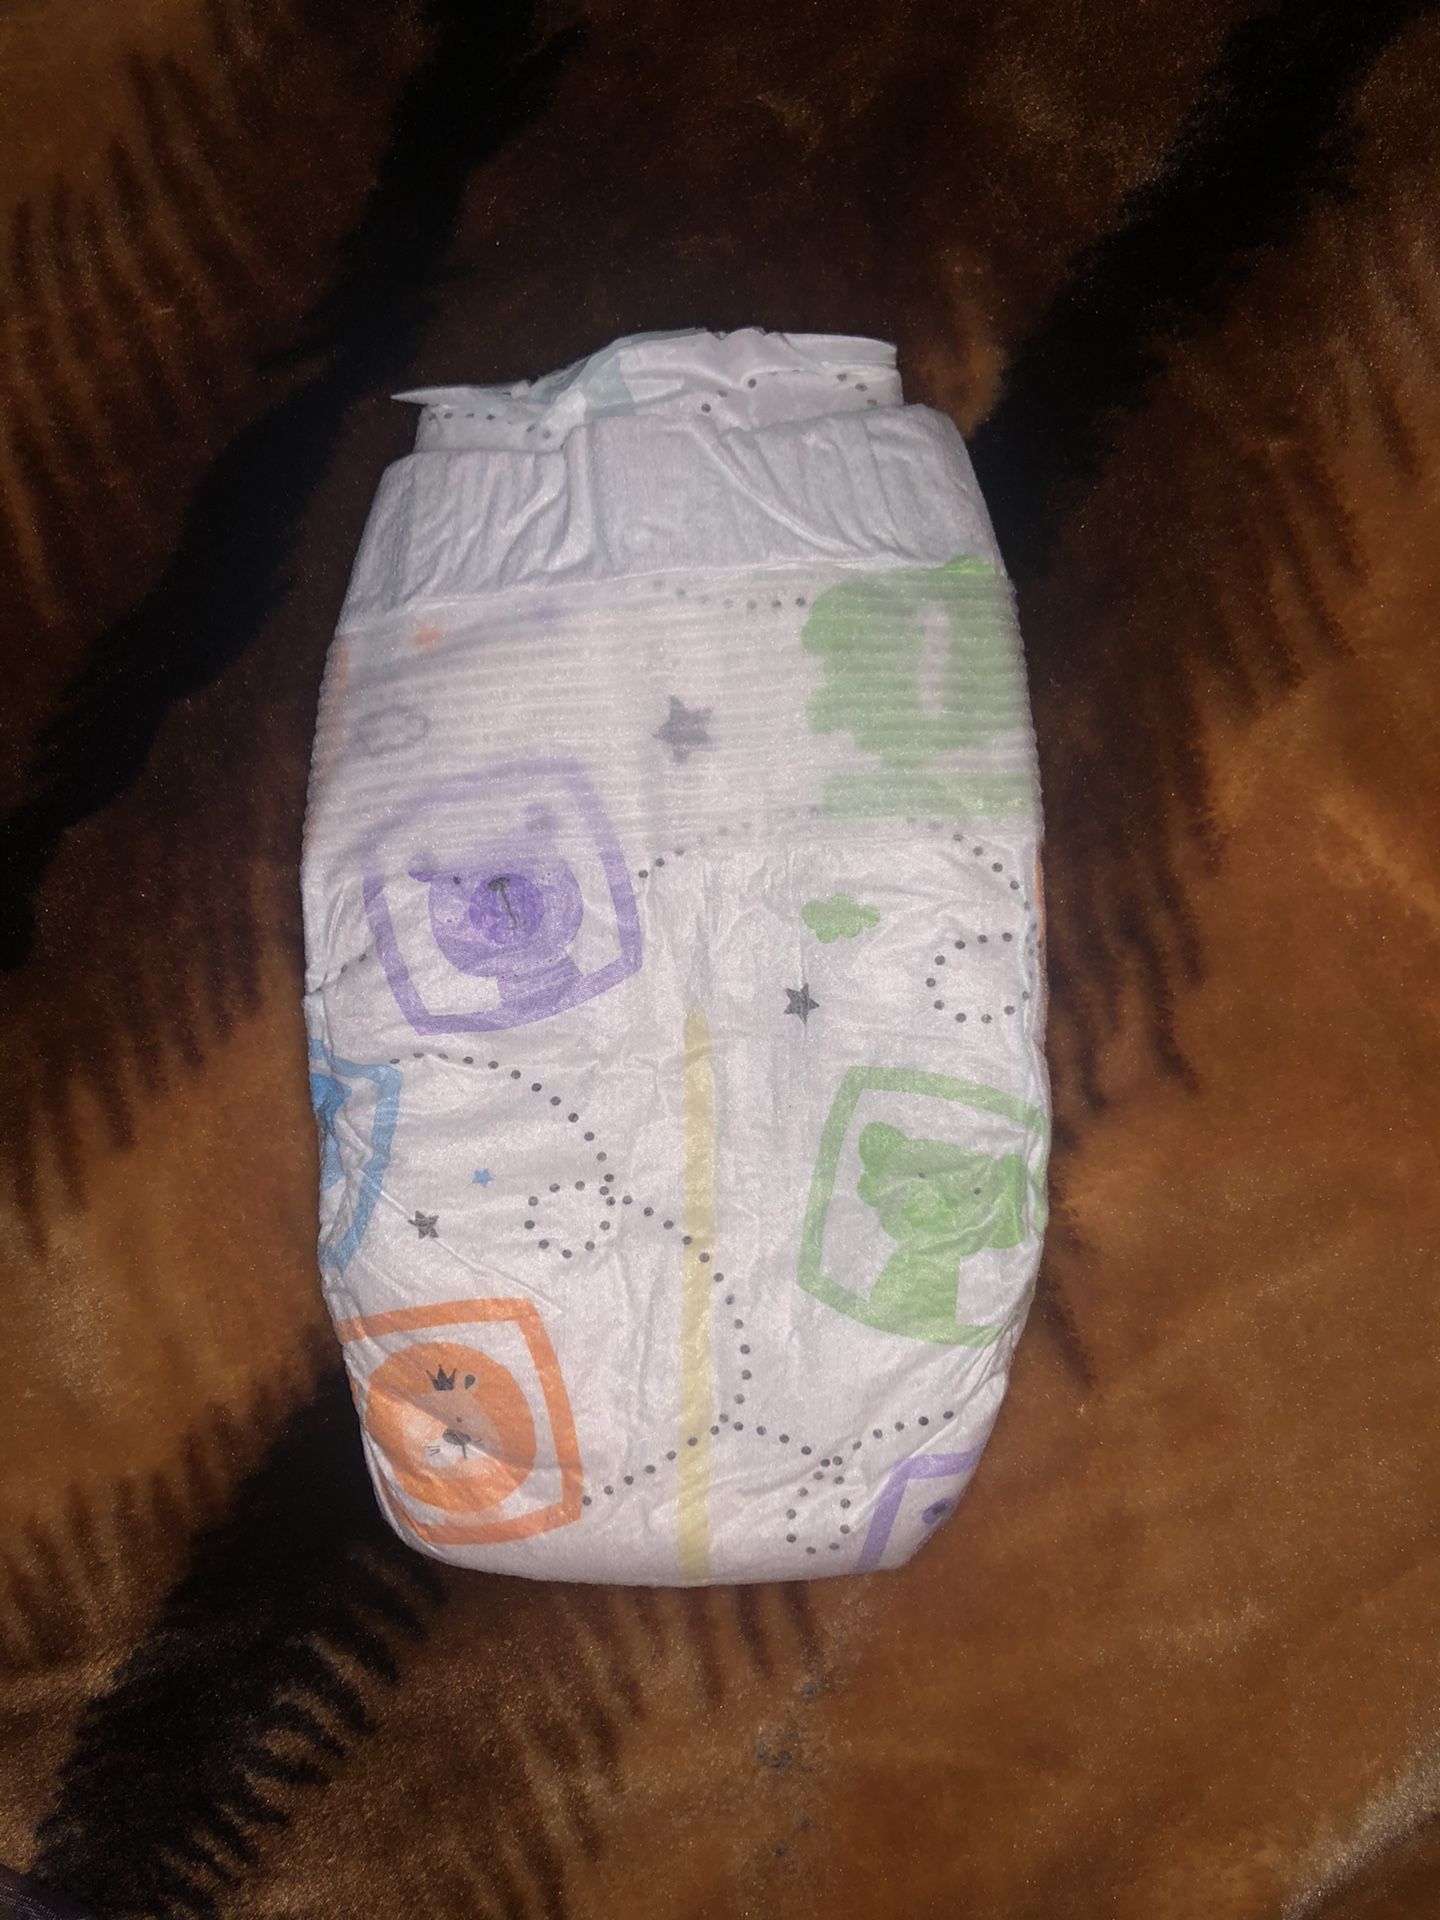 SIZE 1 DIAPERS